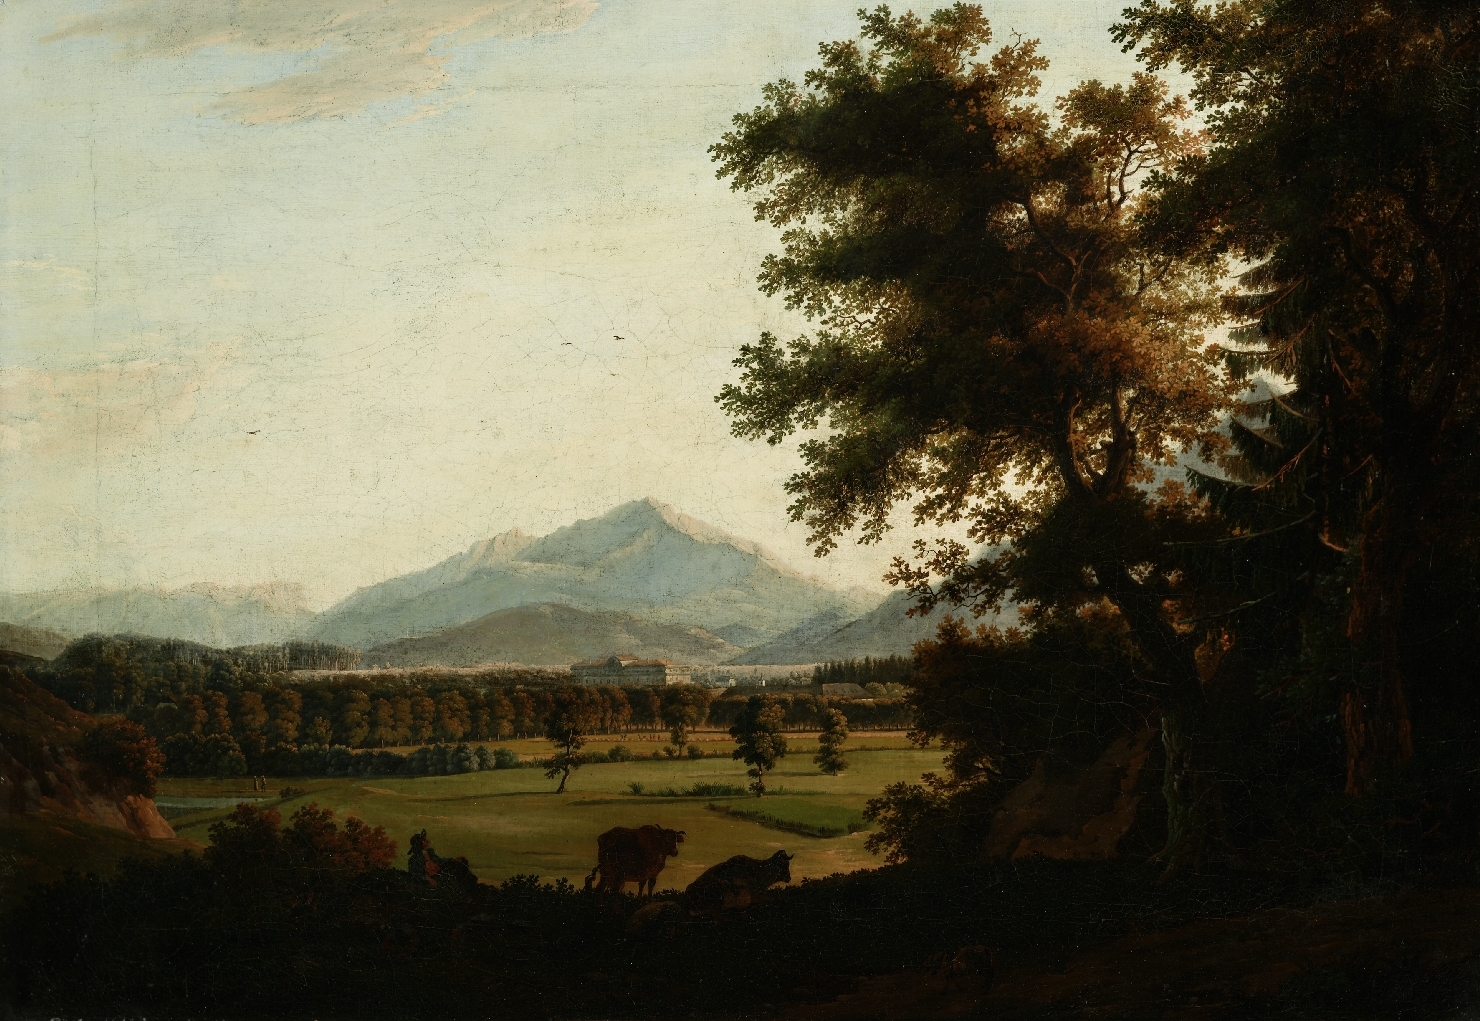 View onto Leopoldskron Palace, Albert Christoph Dies, 1797, oil on canvas, inv. no. 1254-86